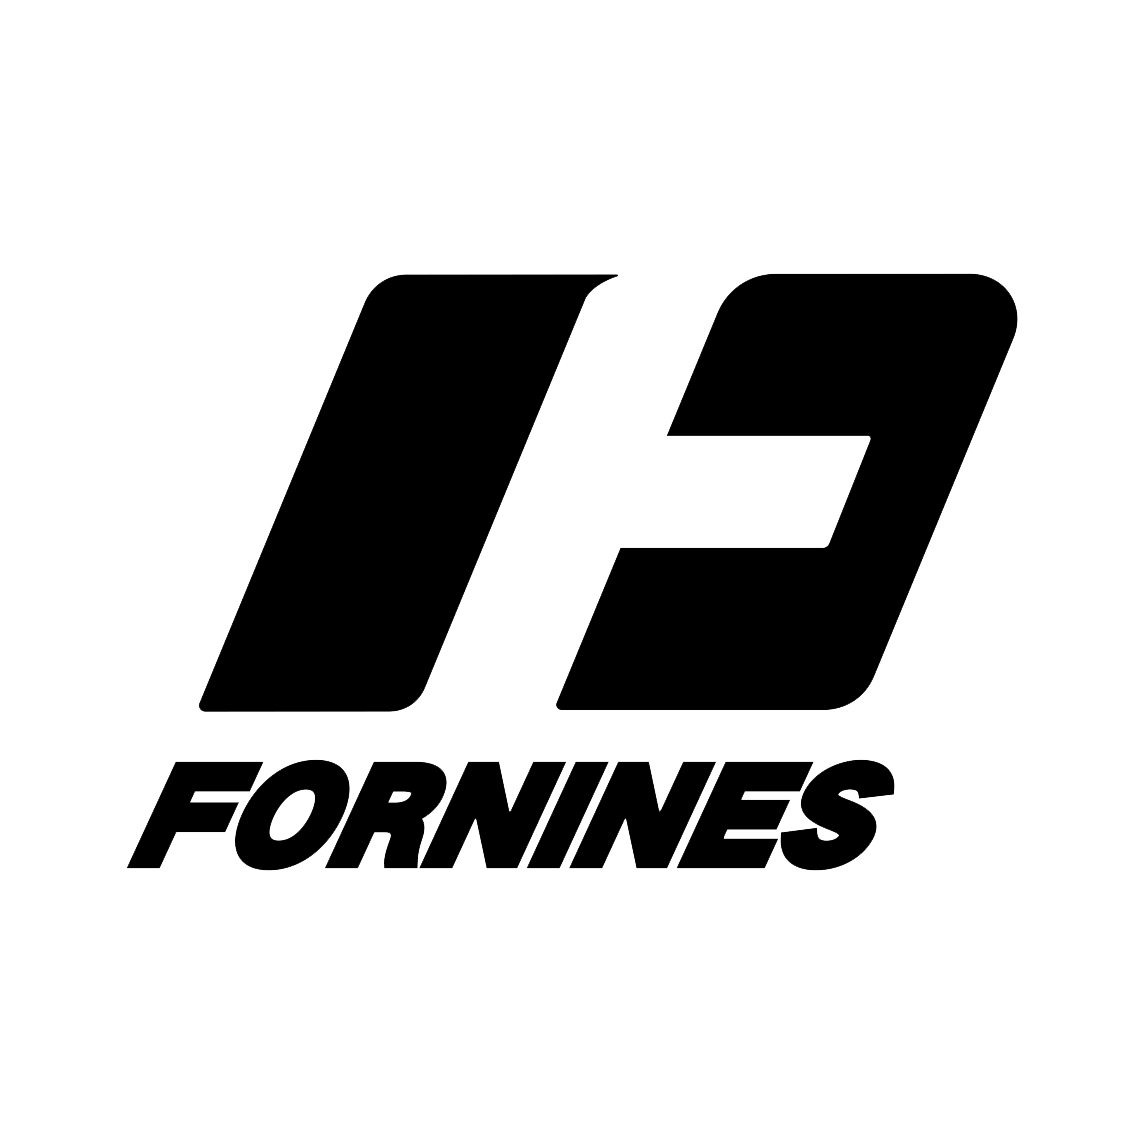 FORNINES